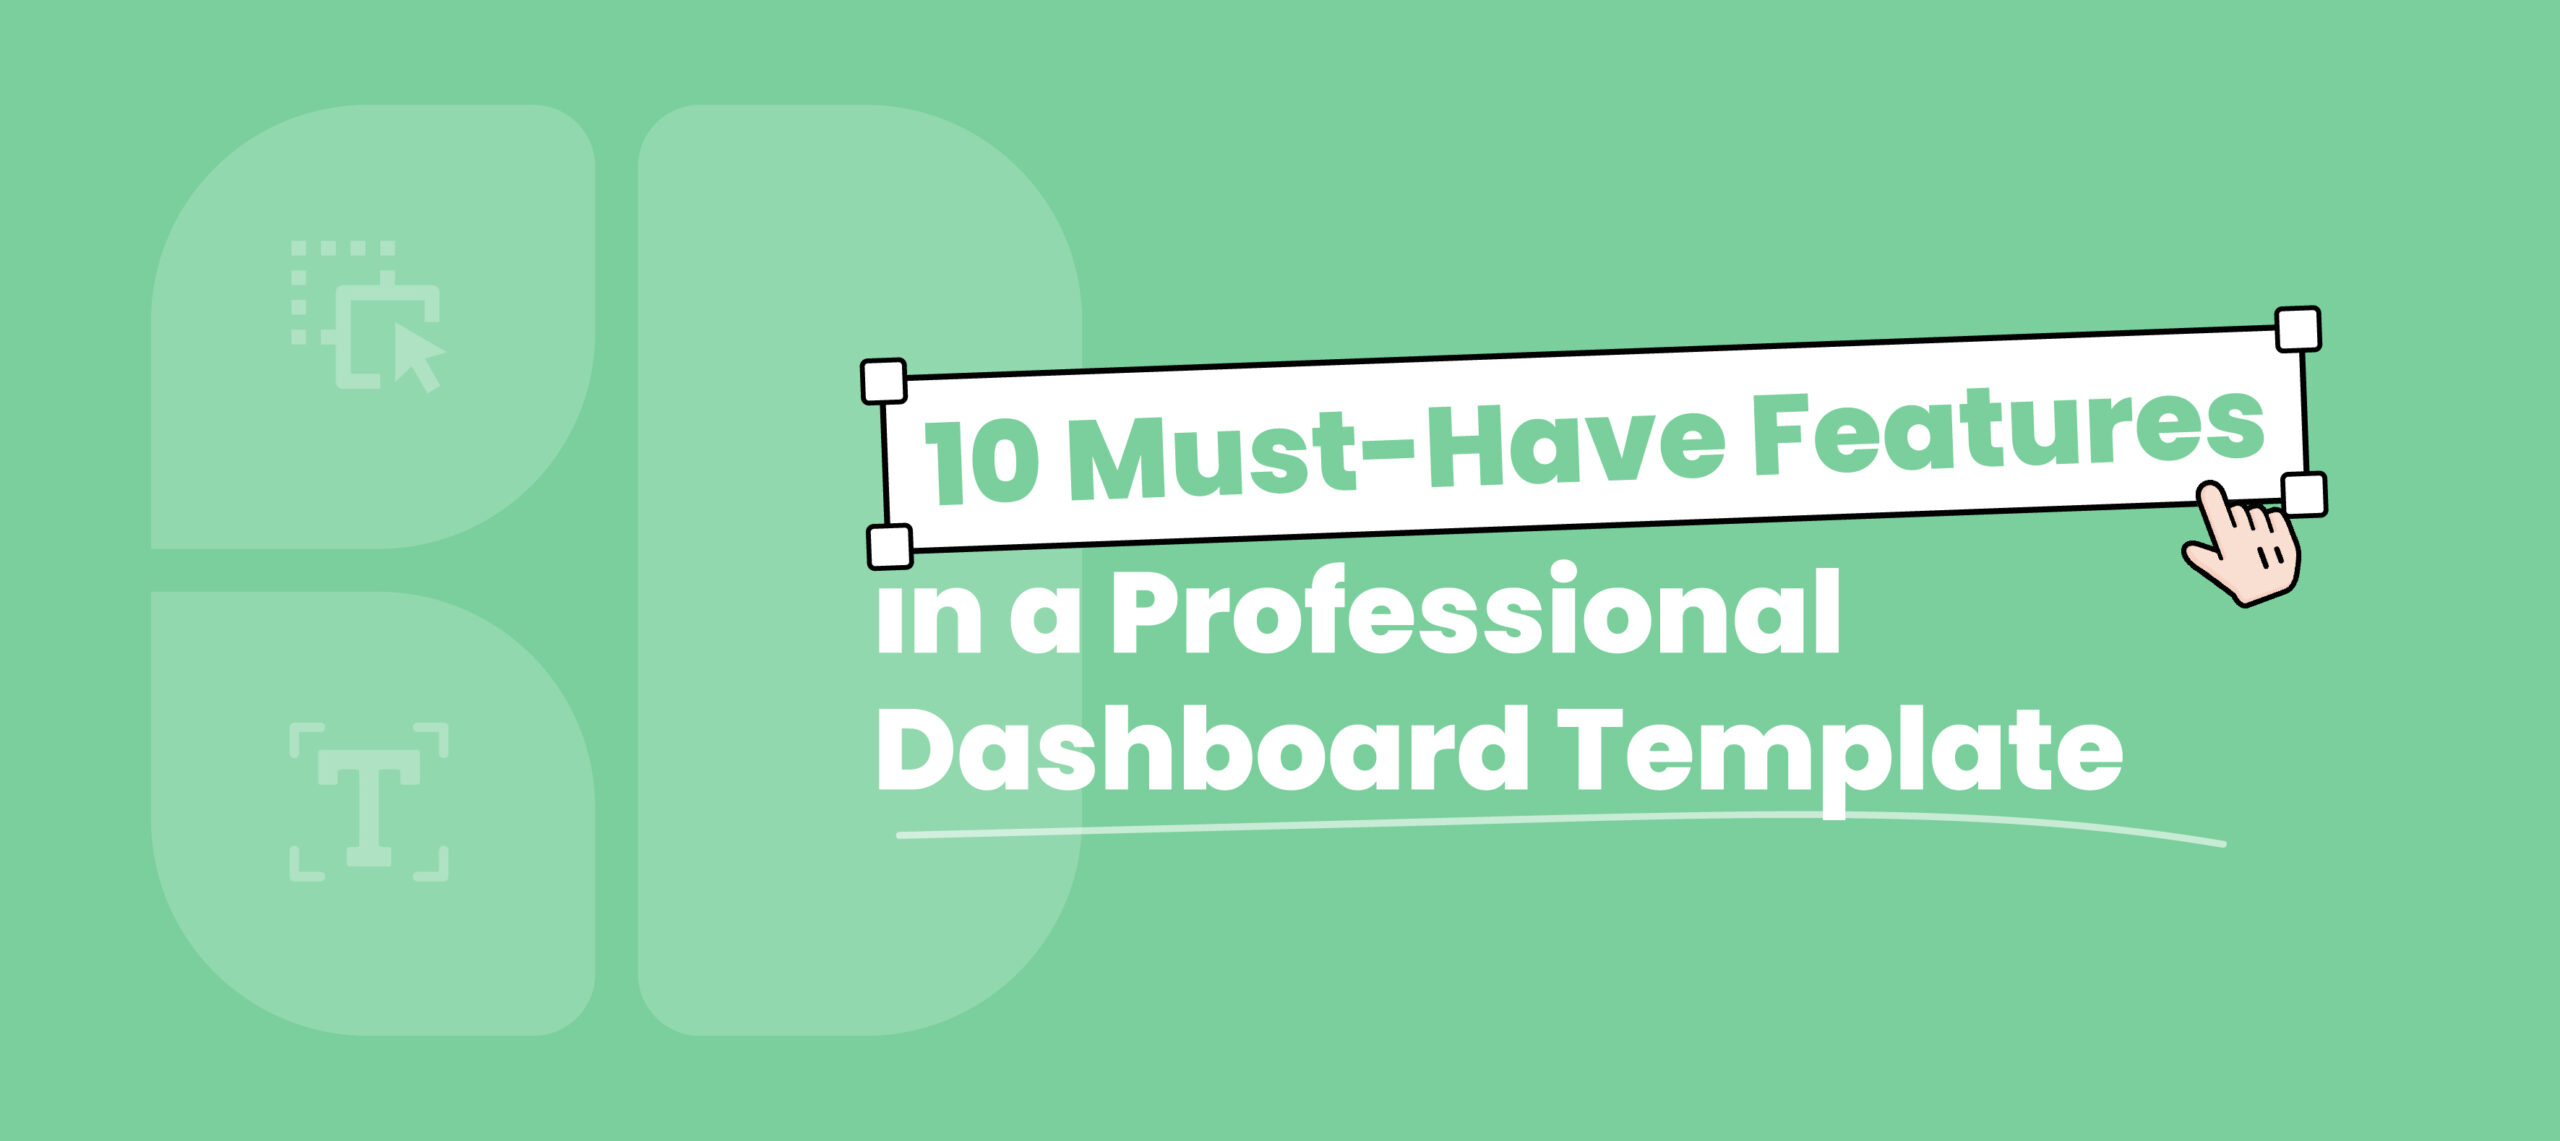  10 Must-Have Features in a Professional Dashboard Template